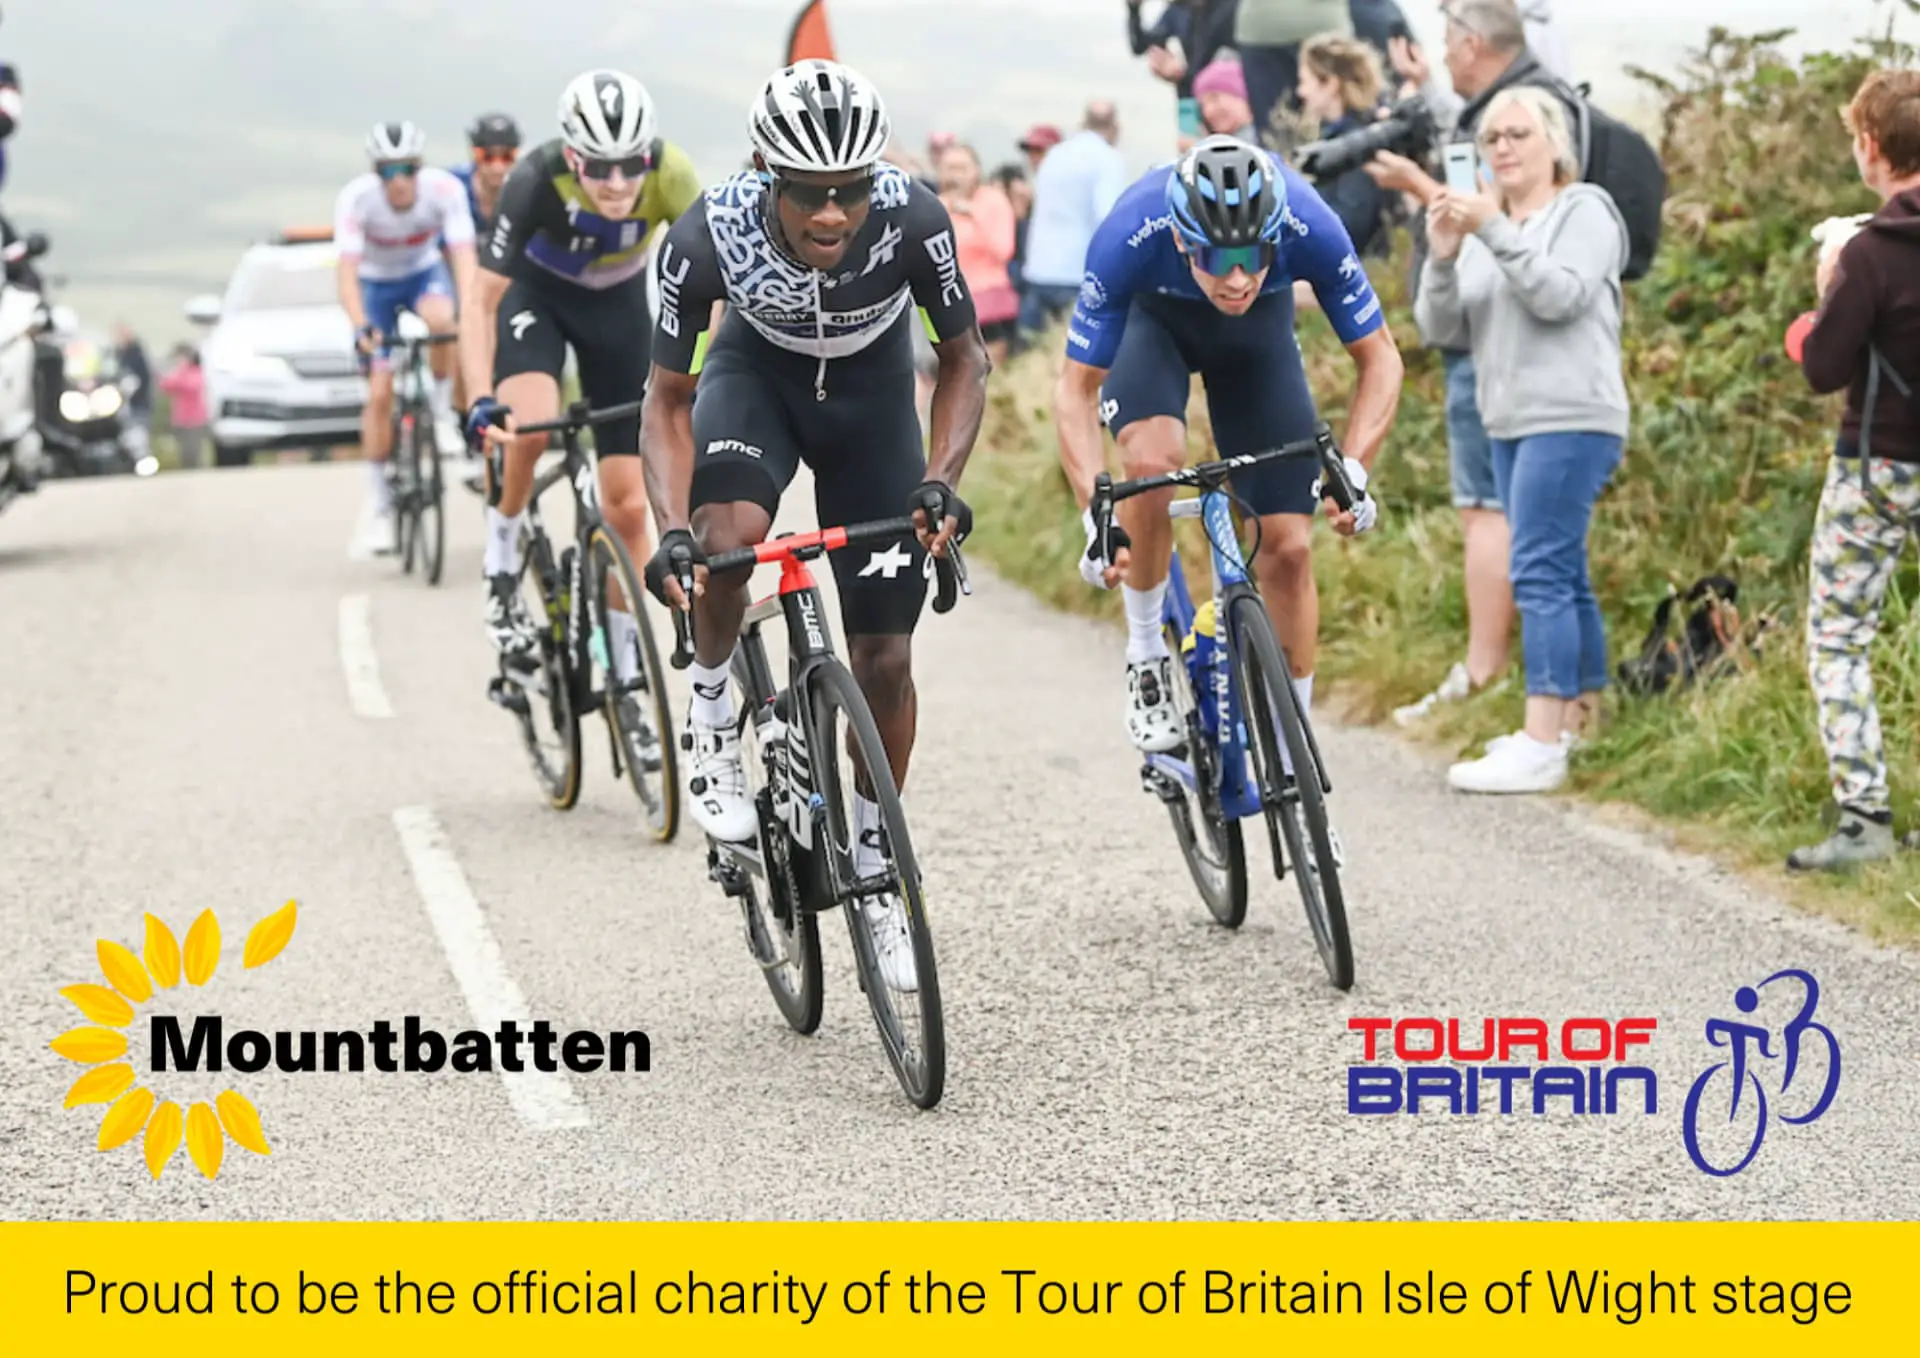 Tour of Britain cyclists with Mountbatten message